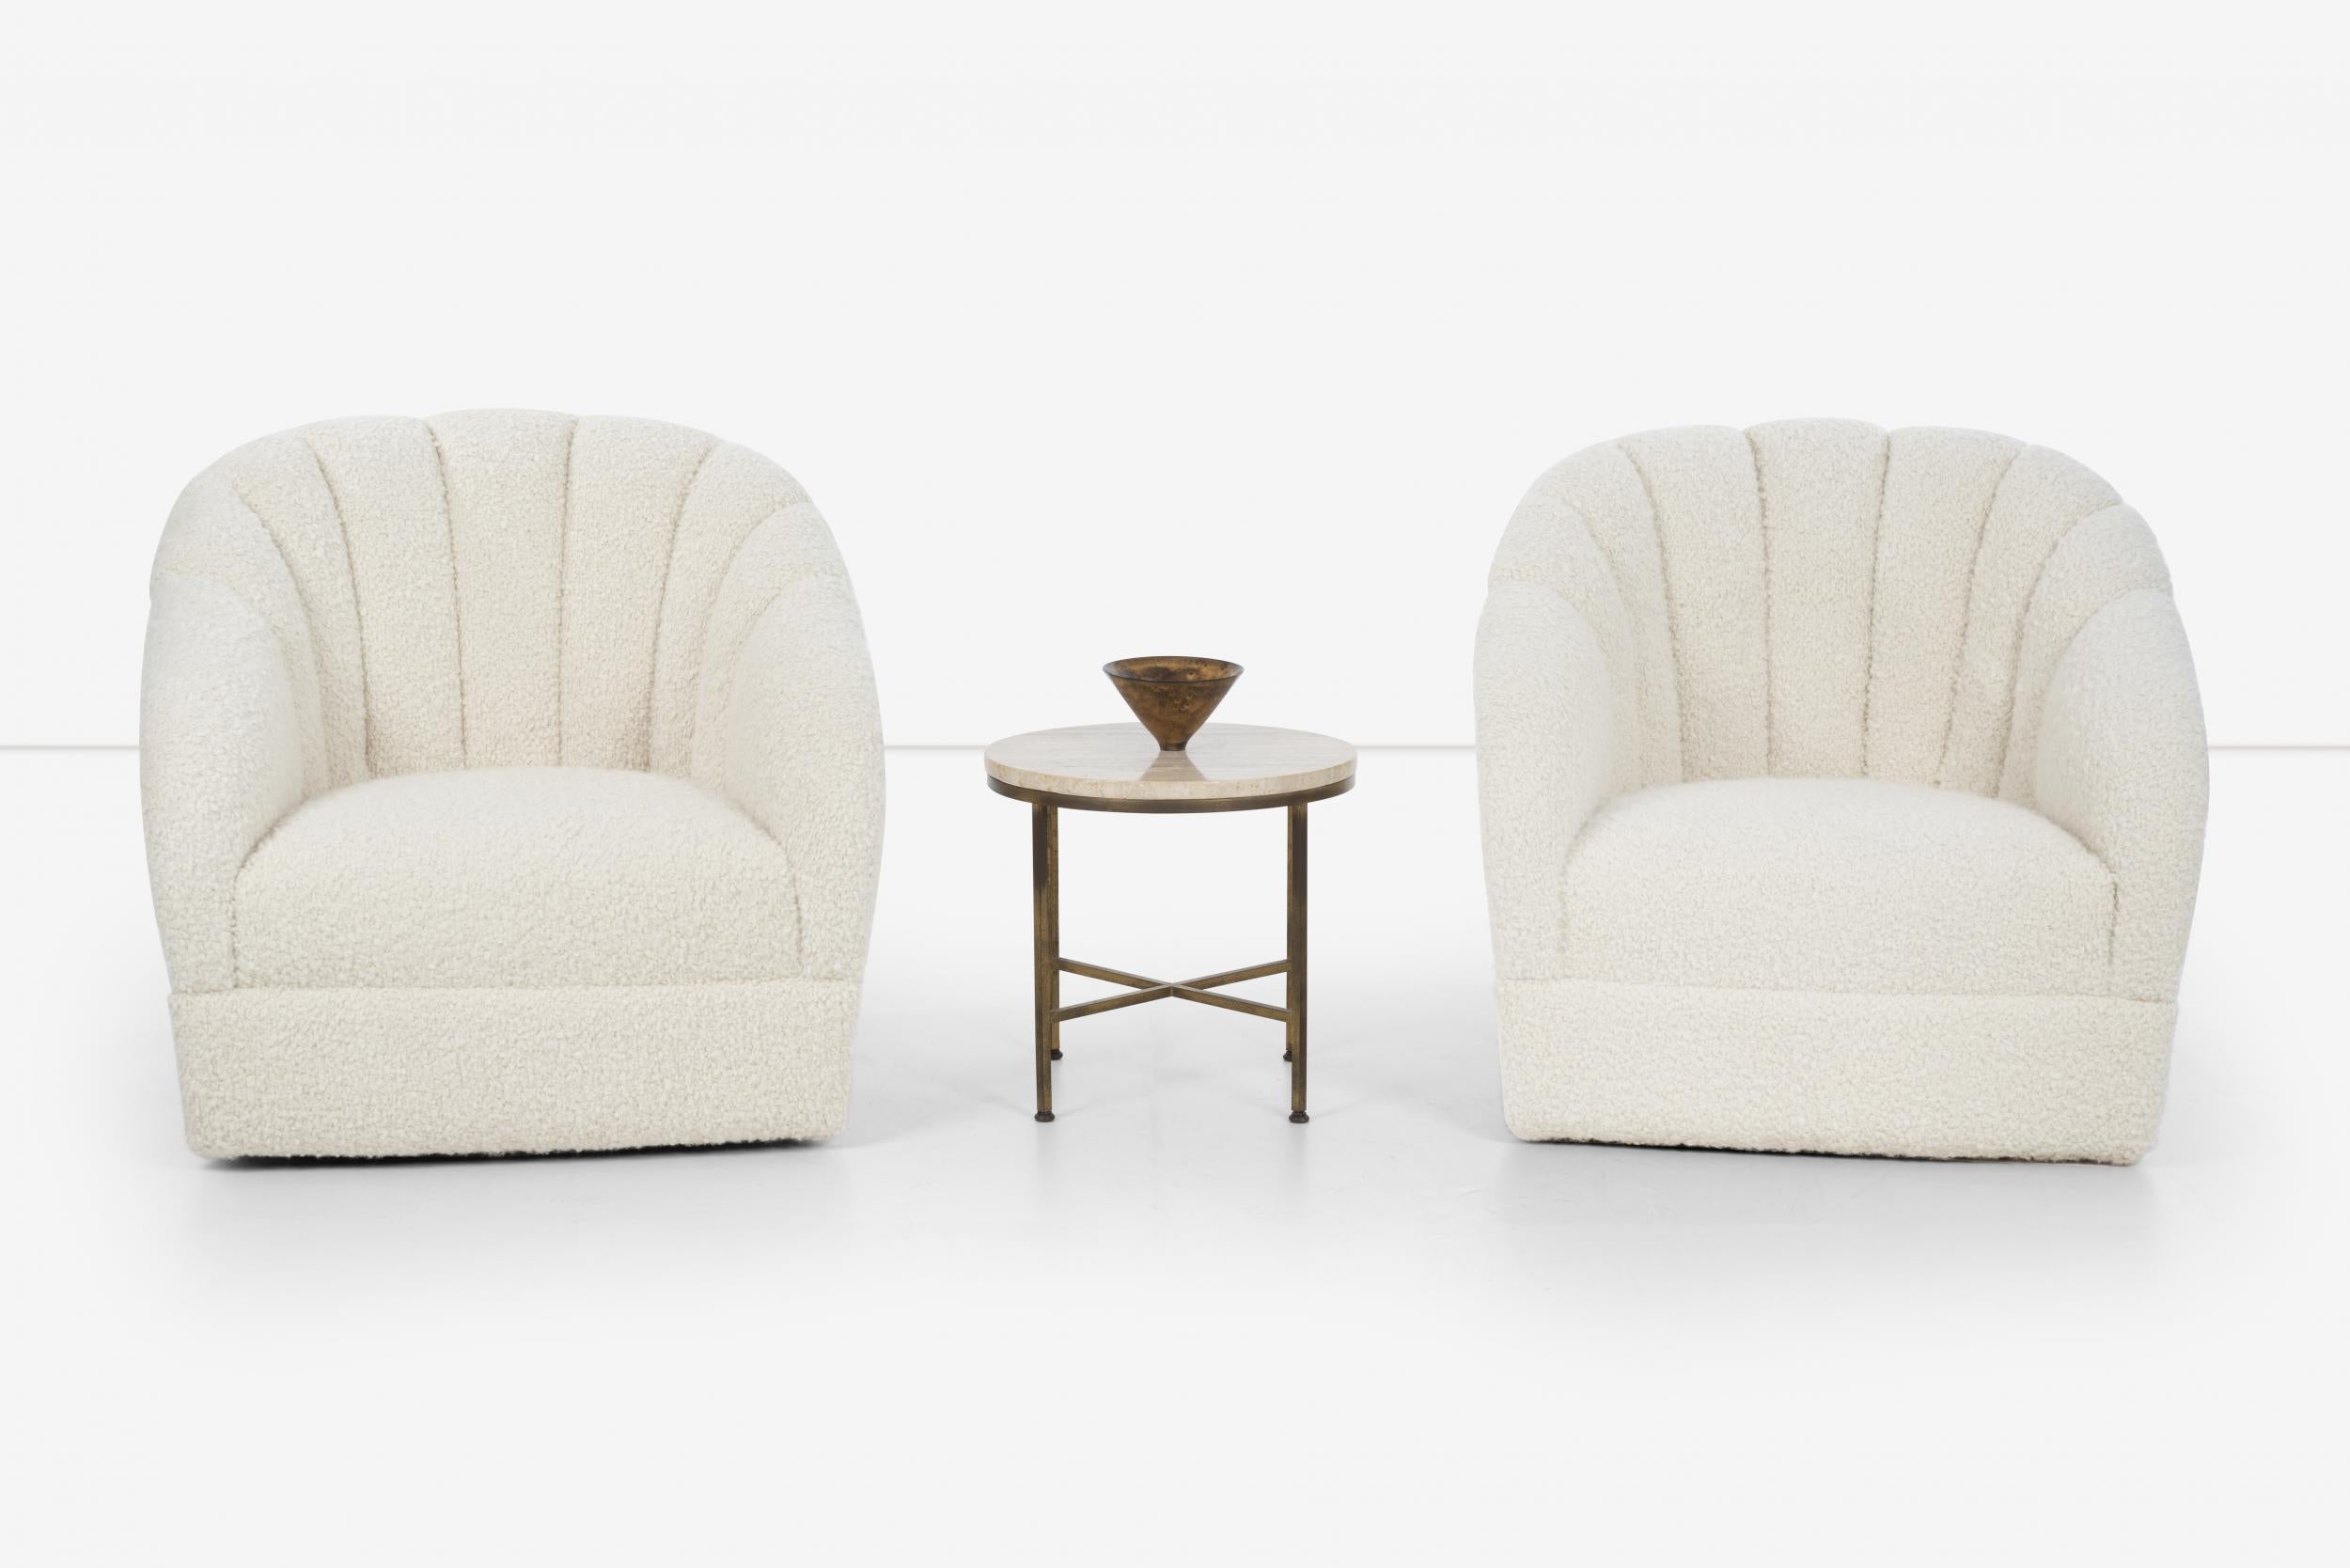 Hand-Crafted Pair of Ward Bennett Lounge Chairs for Brickel